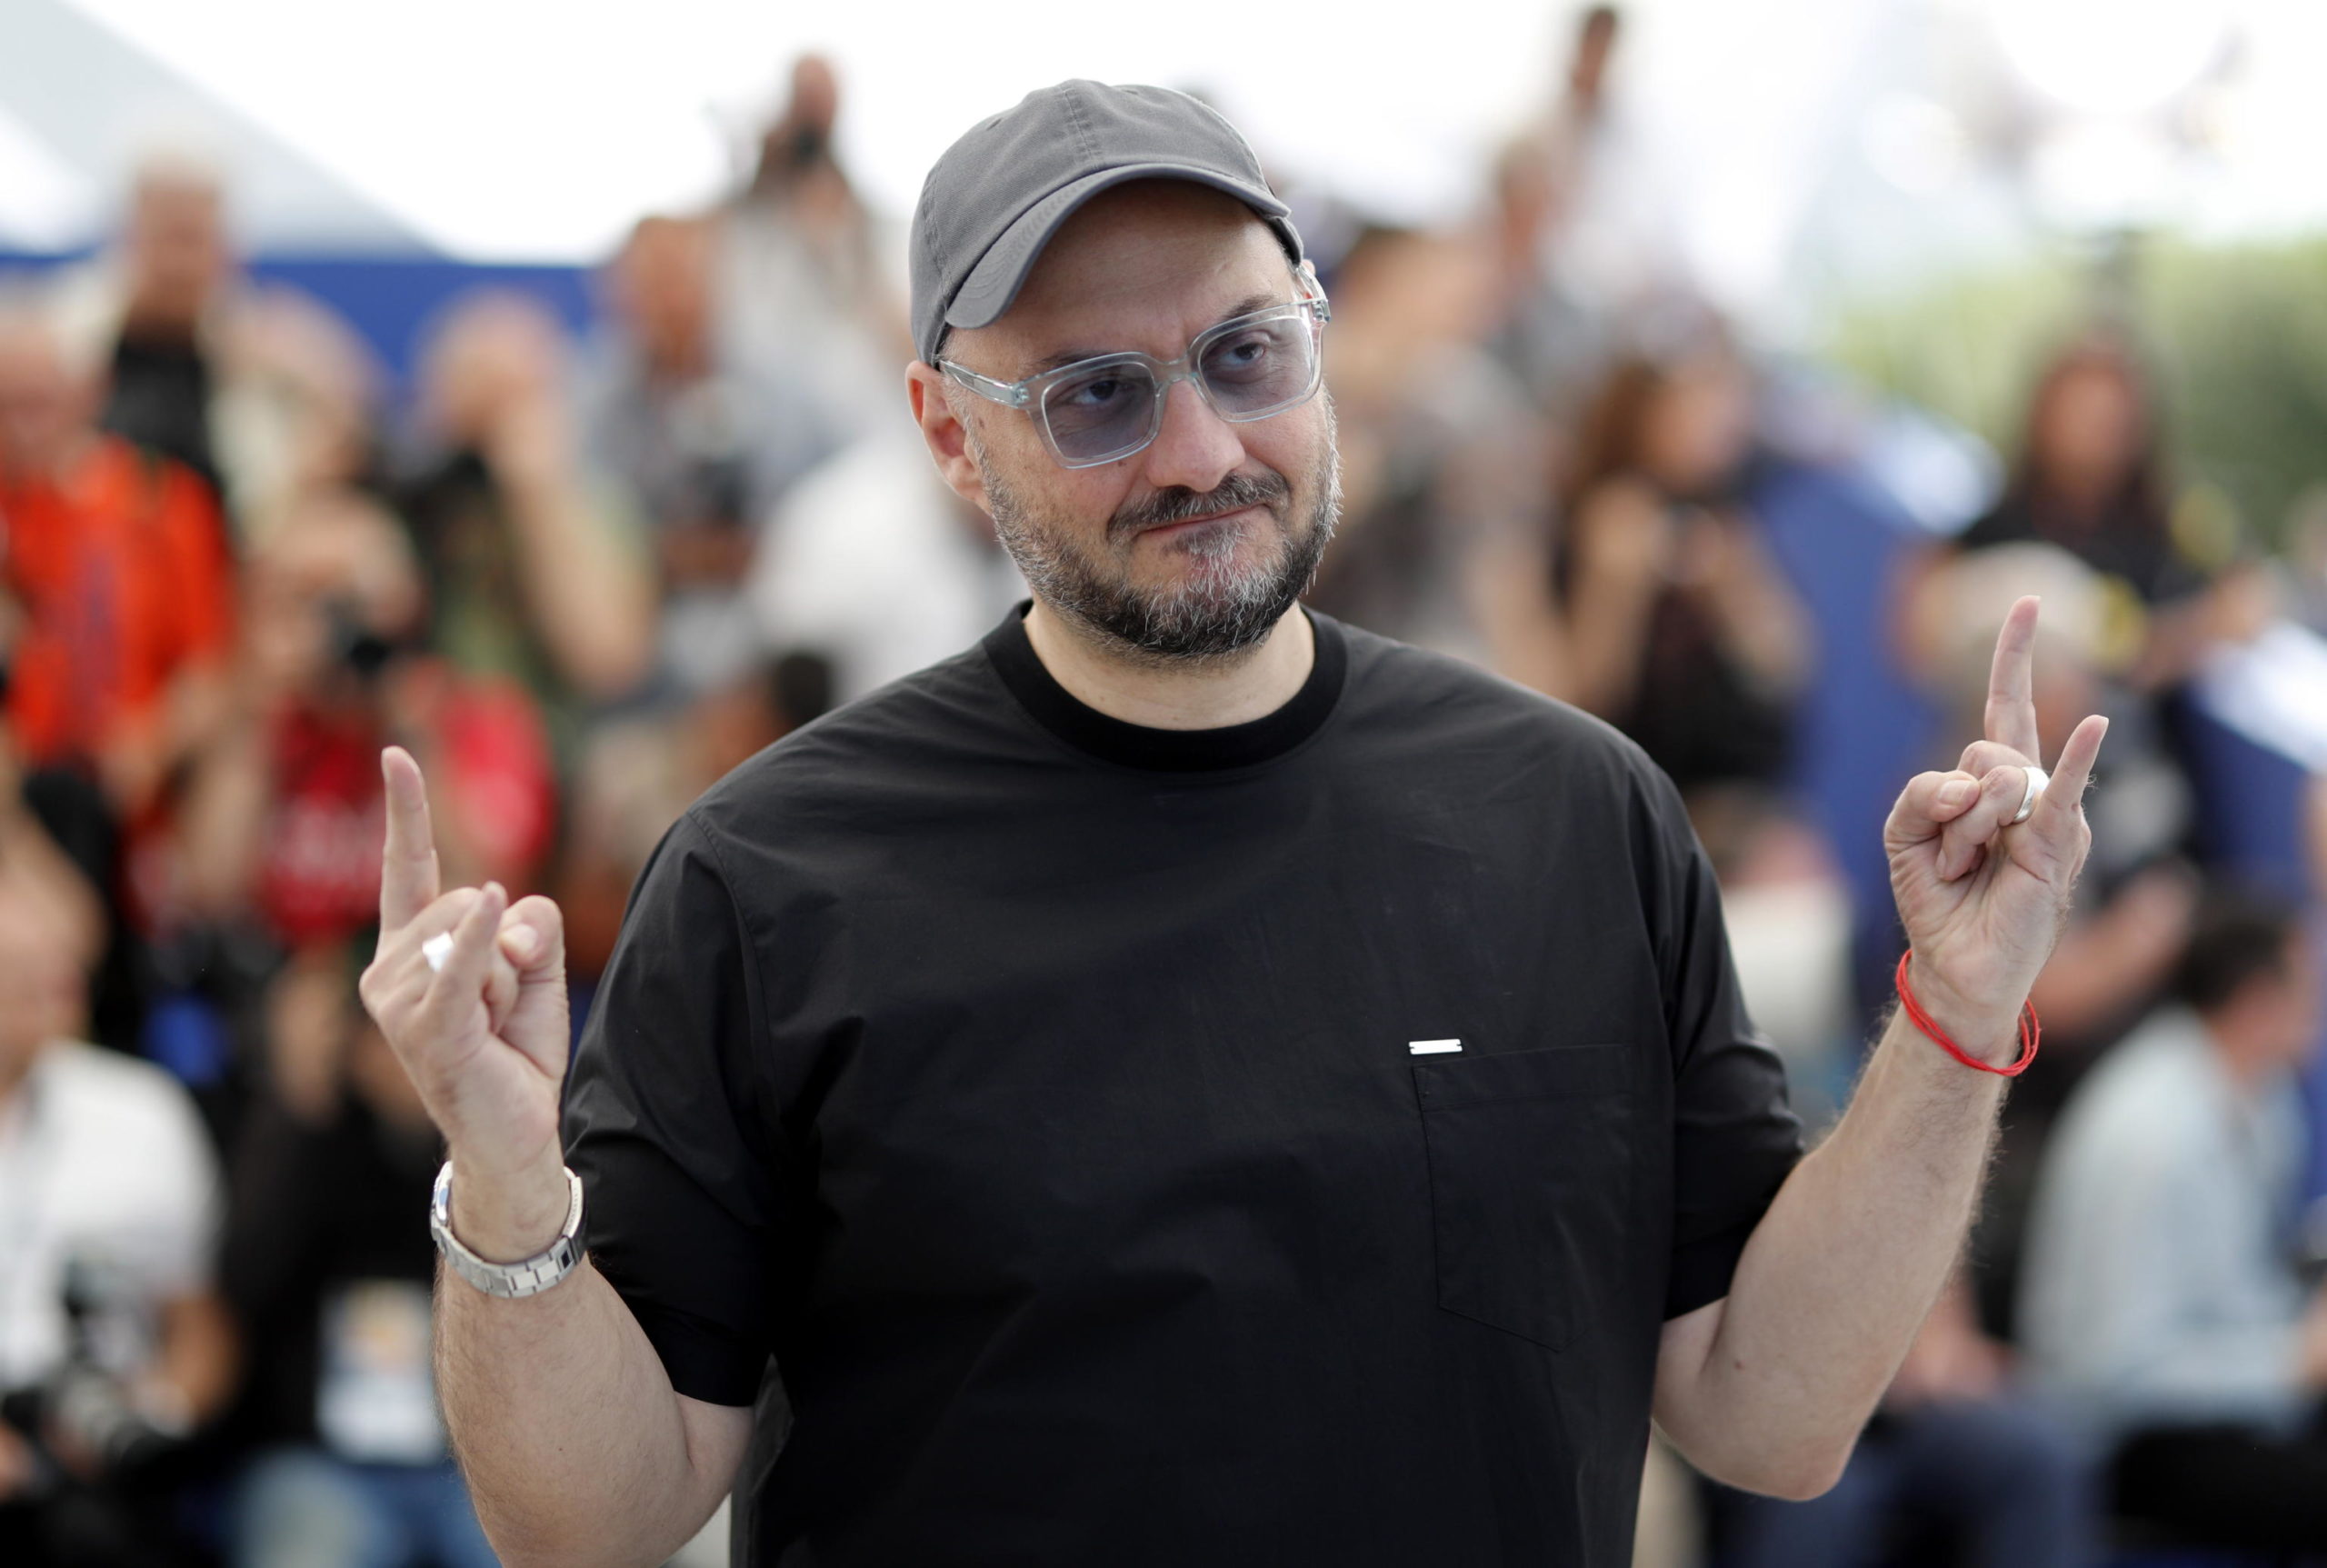 Cannes Film Festival 2022, dissident Russian director Serebrenkov: “War is a form of government suicide. It is a disaster”